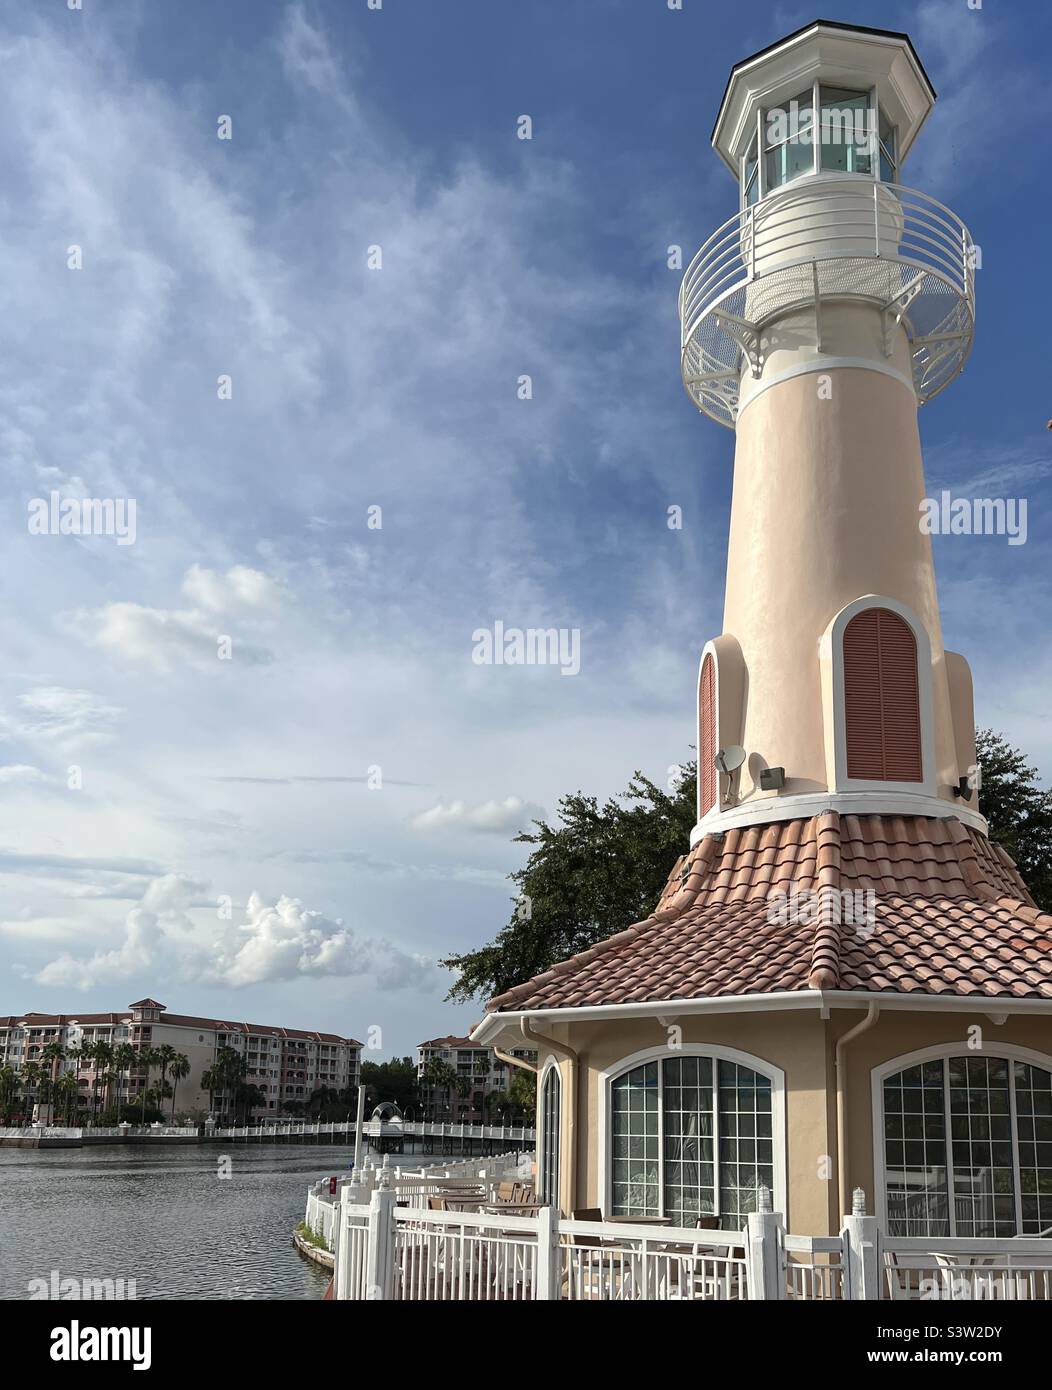 Lighthouse over a pond of water Stock Photo